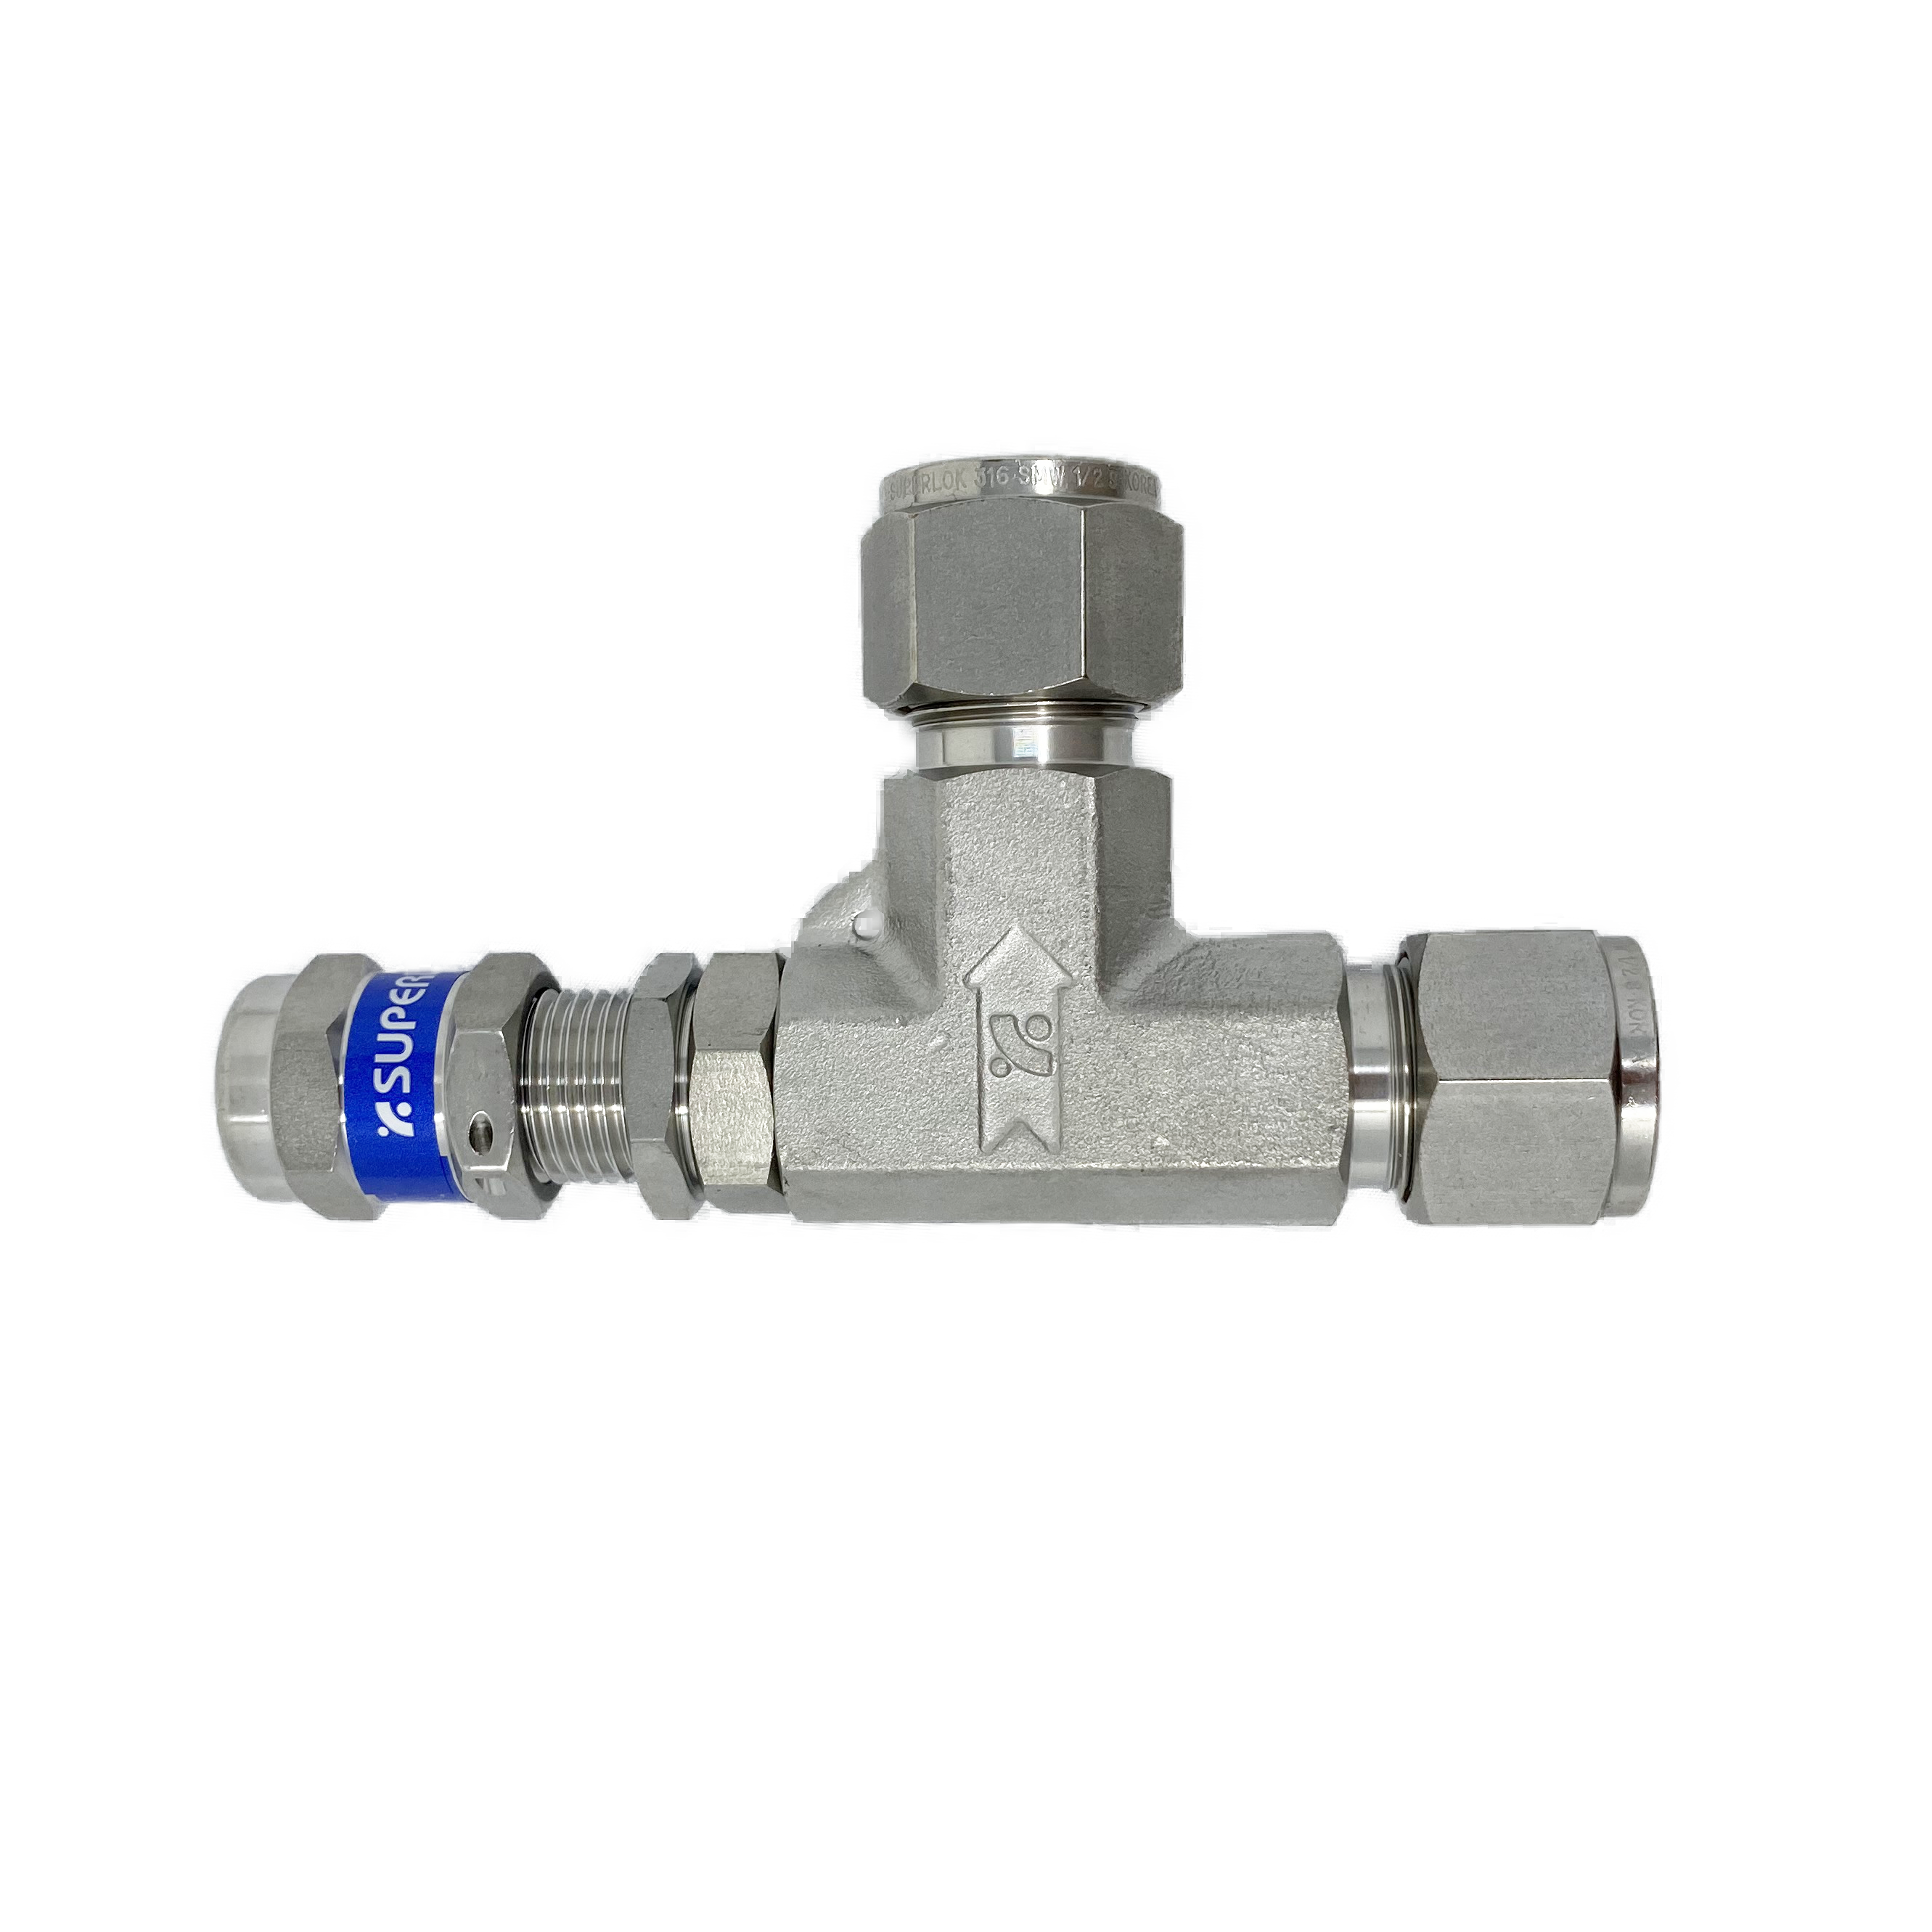 SRVL-S-6 : Superlok Inline Relief Valve, 3/8" O.D. Tube, Angle Pattern, Low Pressure, 300psi, 316SS, No Spring